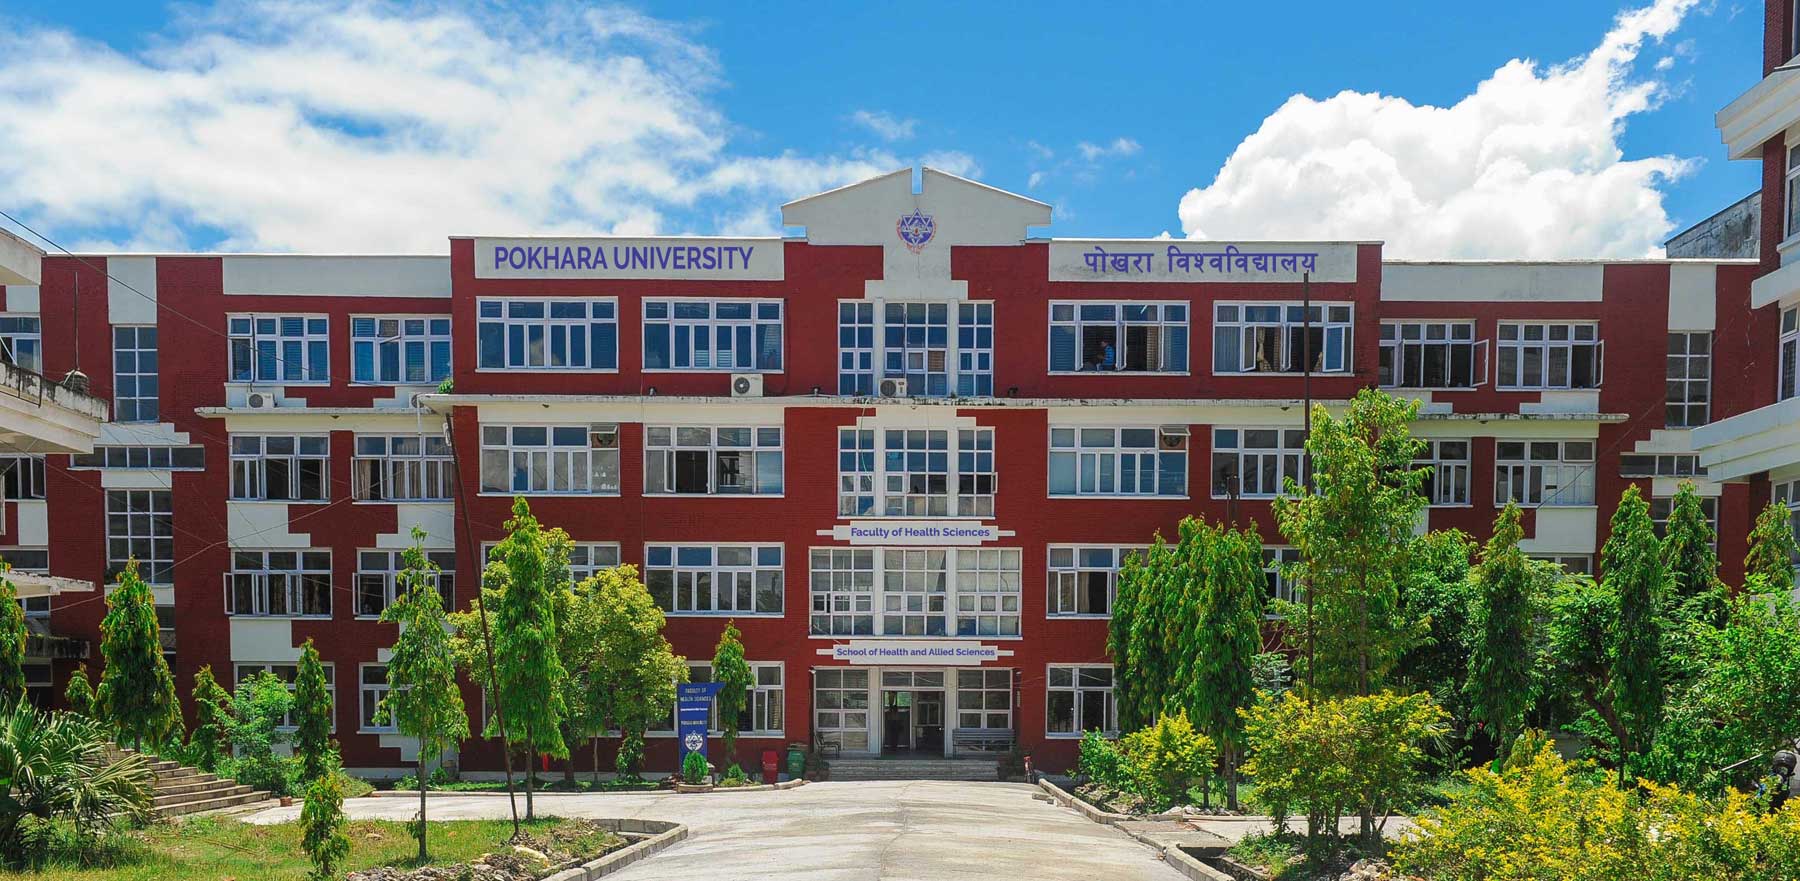 School of Health and Allied Sciences Pokhara University Building